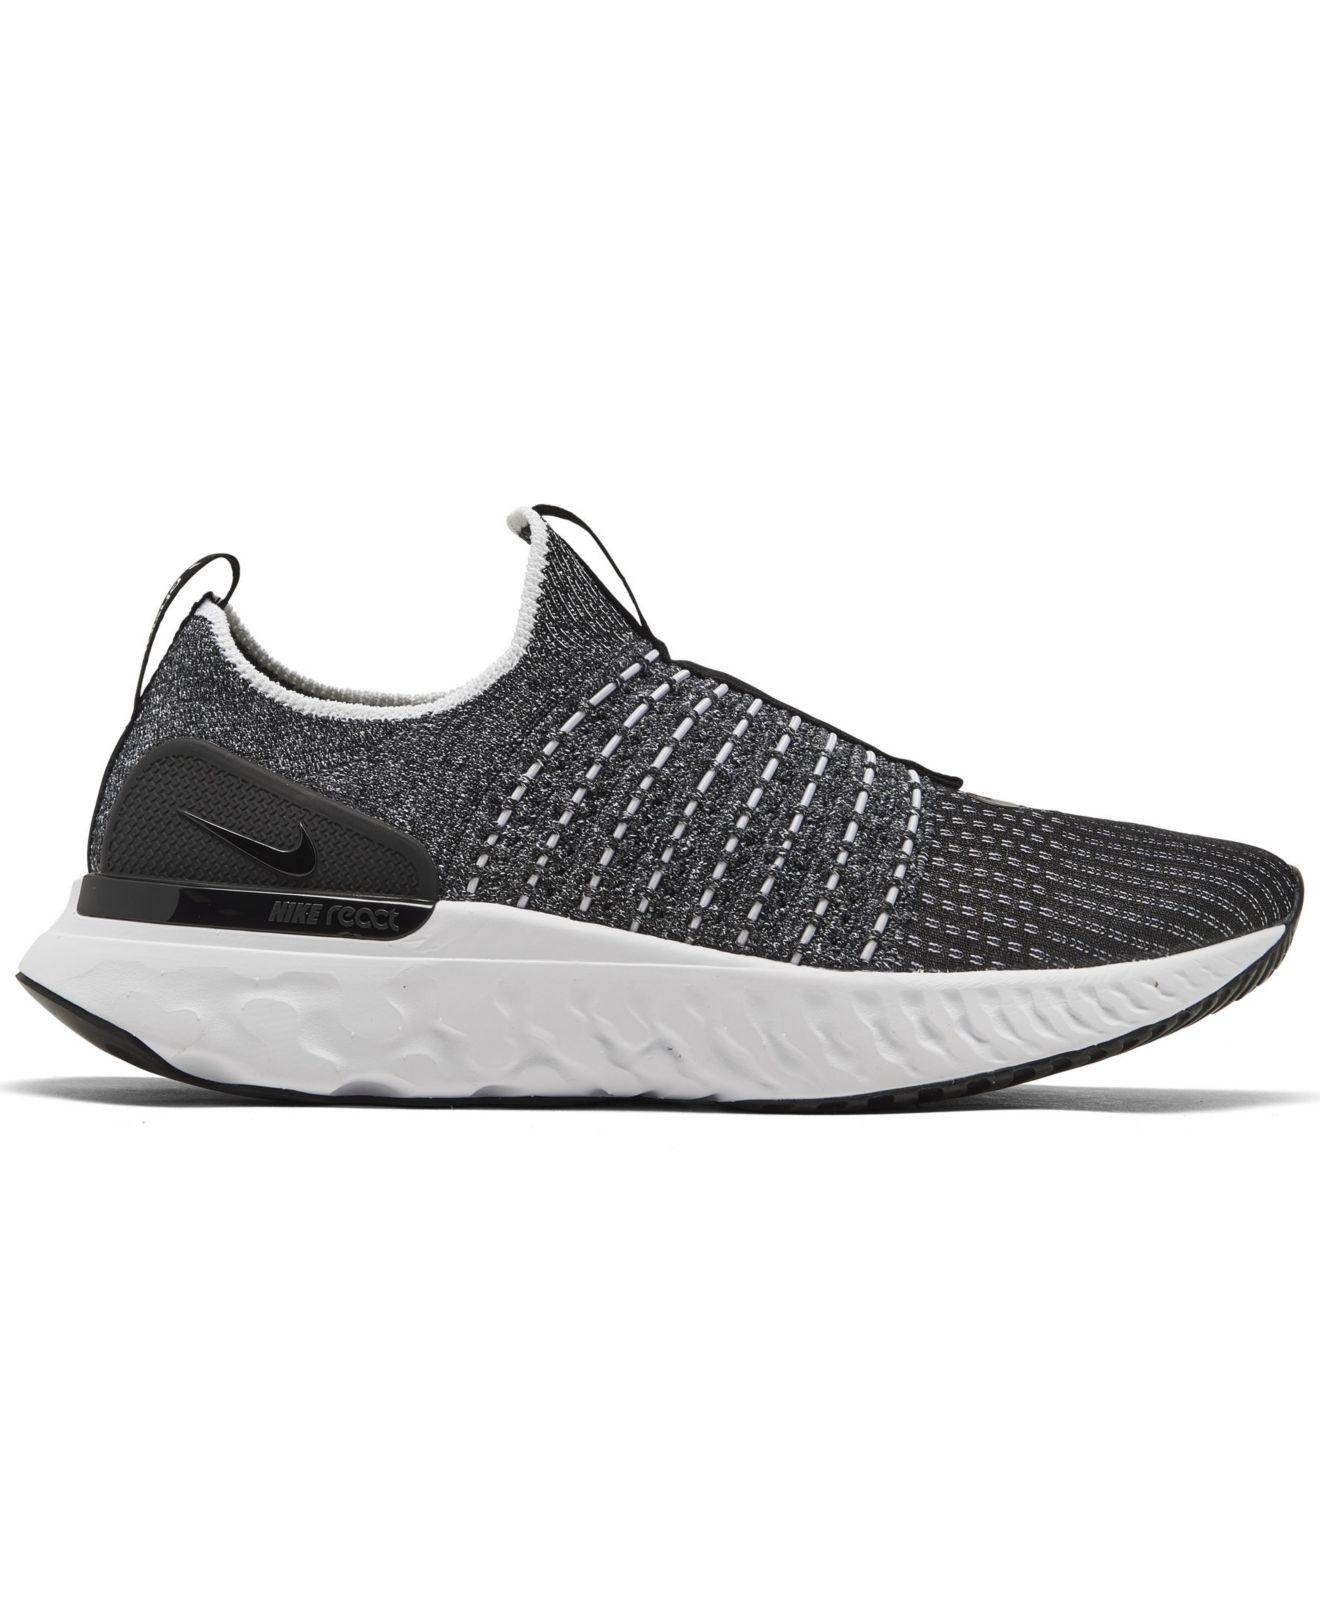 Nike Lace React Phantom Run Flyknit 2 Sneakers From Finish Line in ...